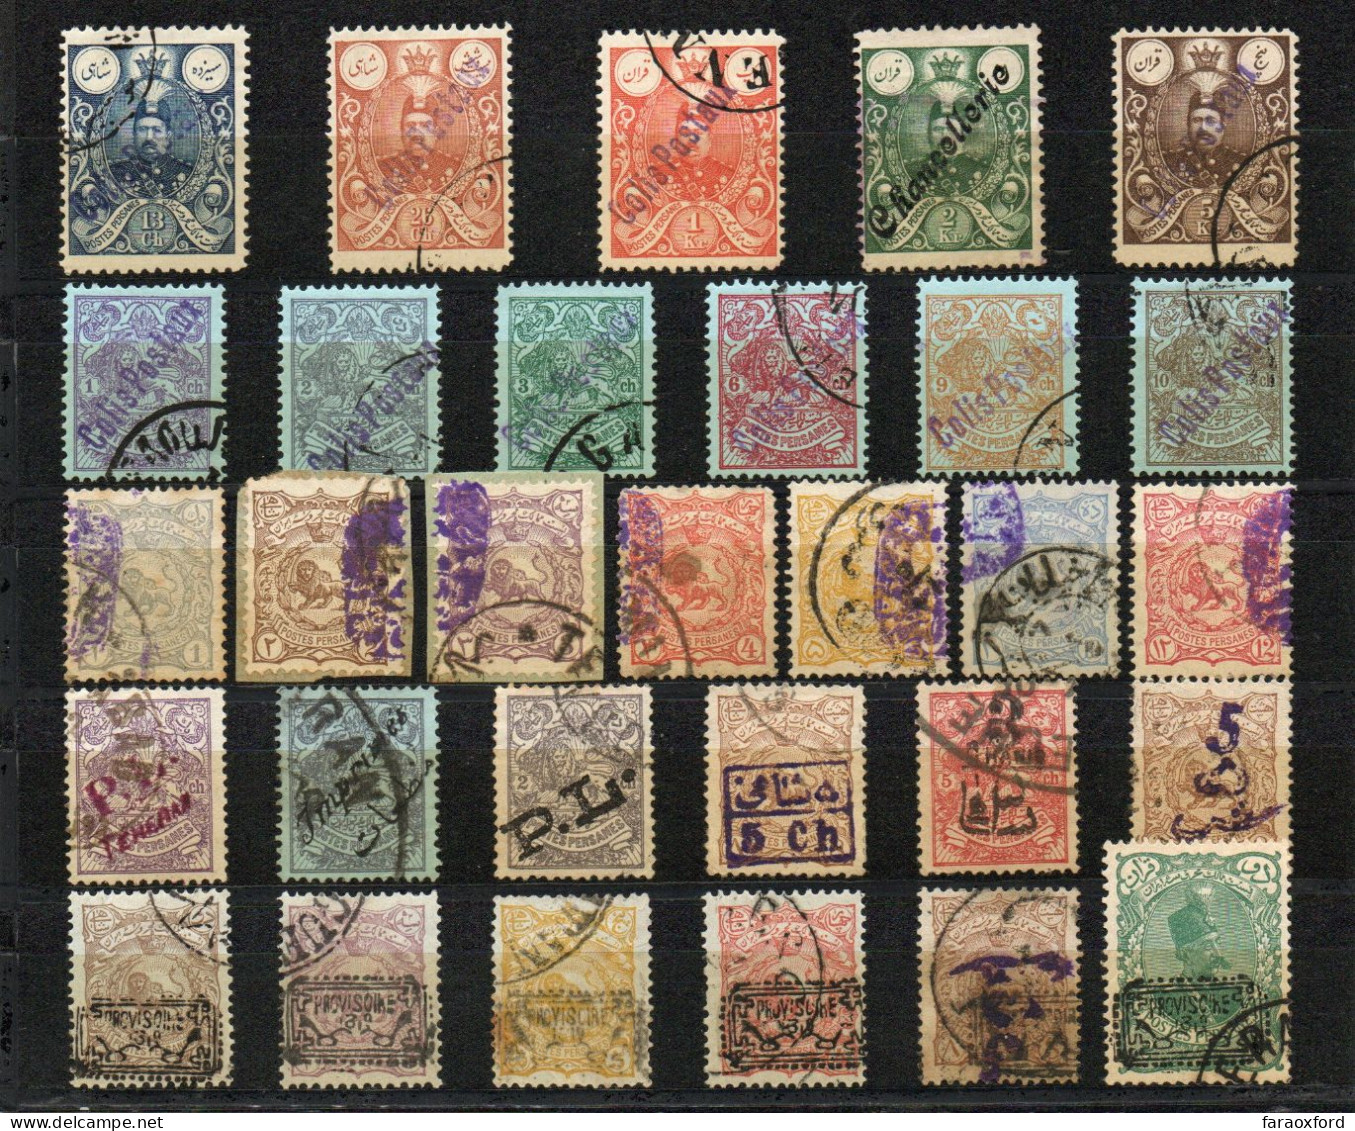 IRAN - ايران - PERSIA - 1894 To 1907 - COLLECTION OF 30 STAMPS - WITH RARE OVERPRINTS - VERY GOOD USED - Iran